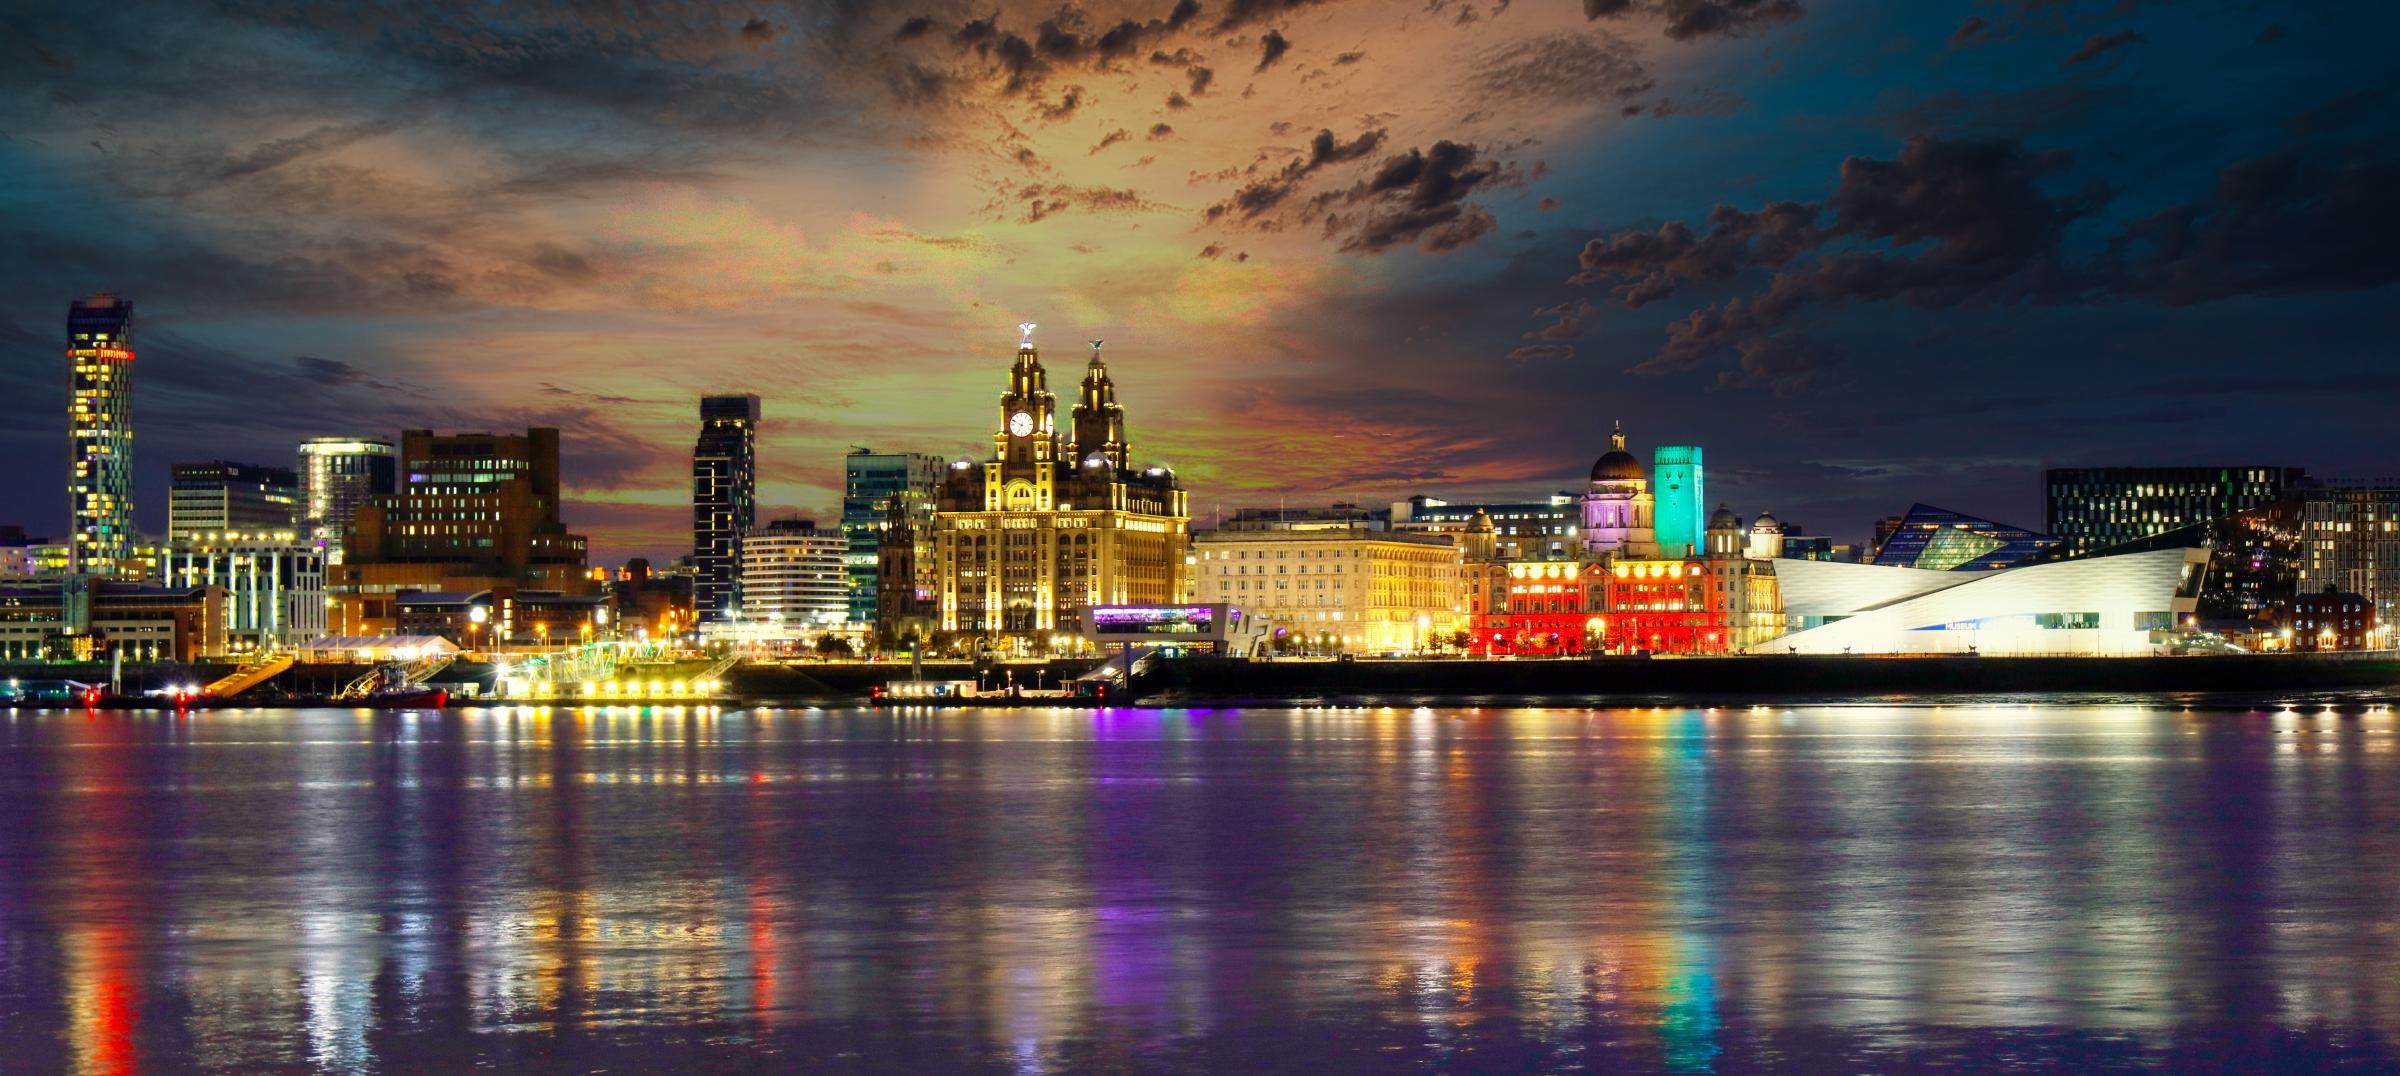 Iconic Liverpool waterfront